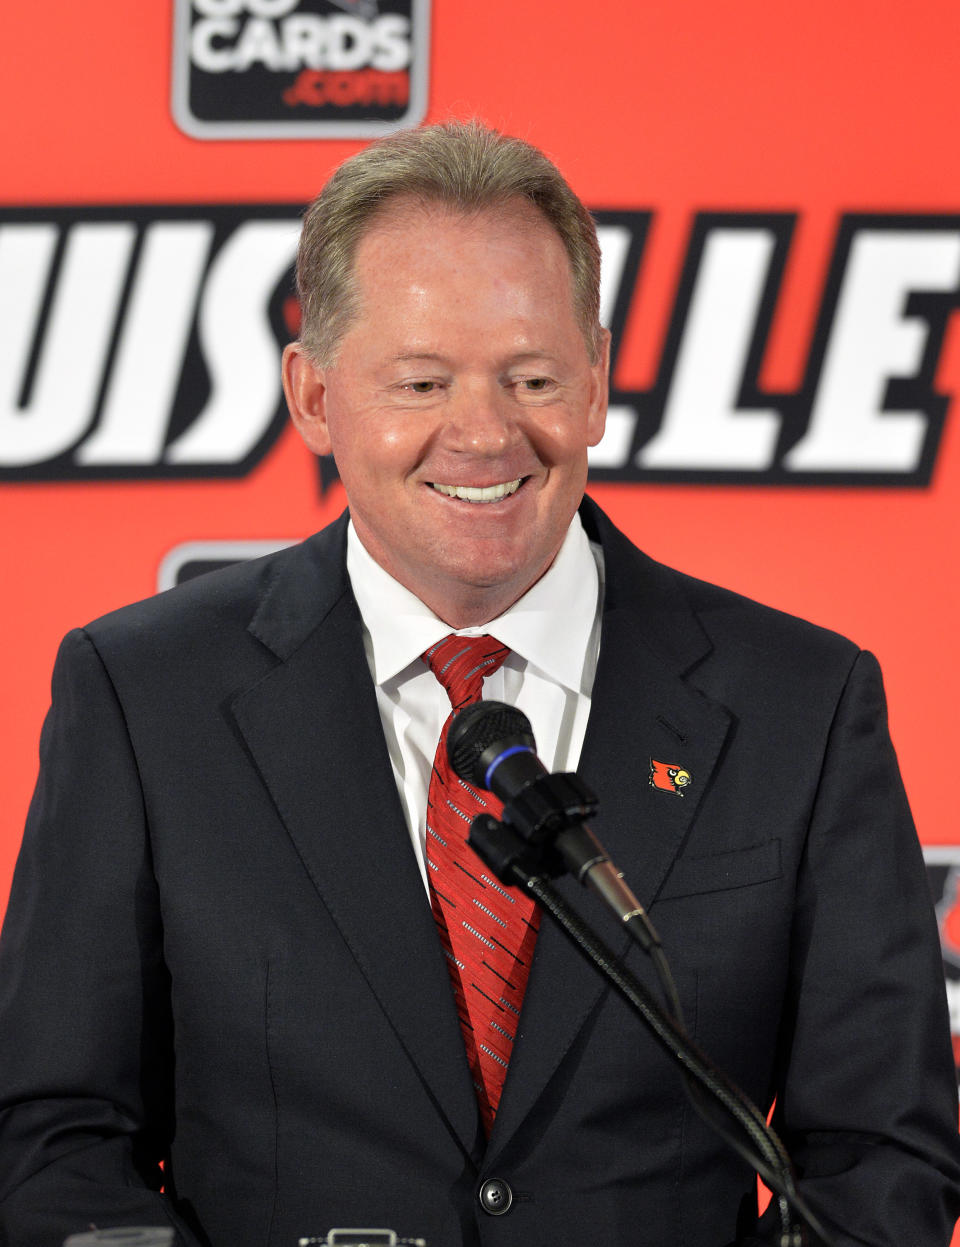 New Louisville head football coach Bobby Petrino address reporters following the announcement of his hiring Thursday, Jan. 9, 2014, at Papa John's Cardinal Stadium in Louisville, Ky. (AP Photo/Timothy D. Easley)